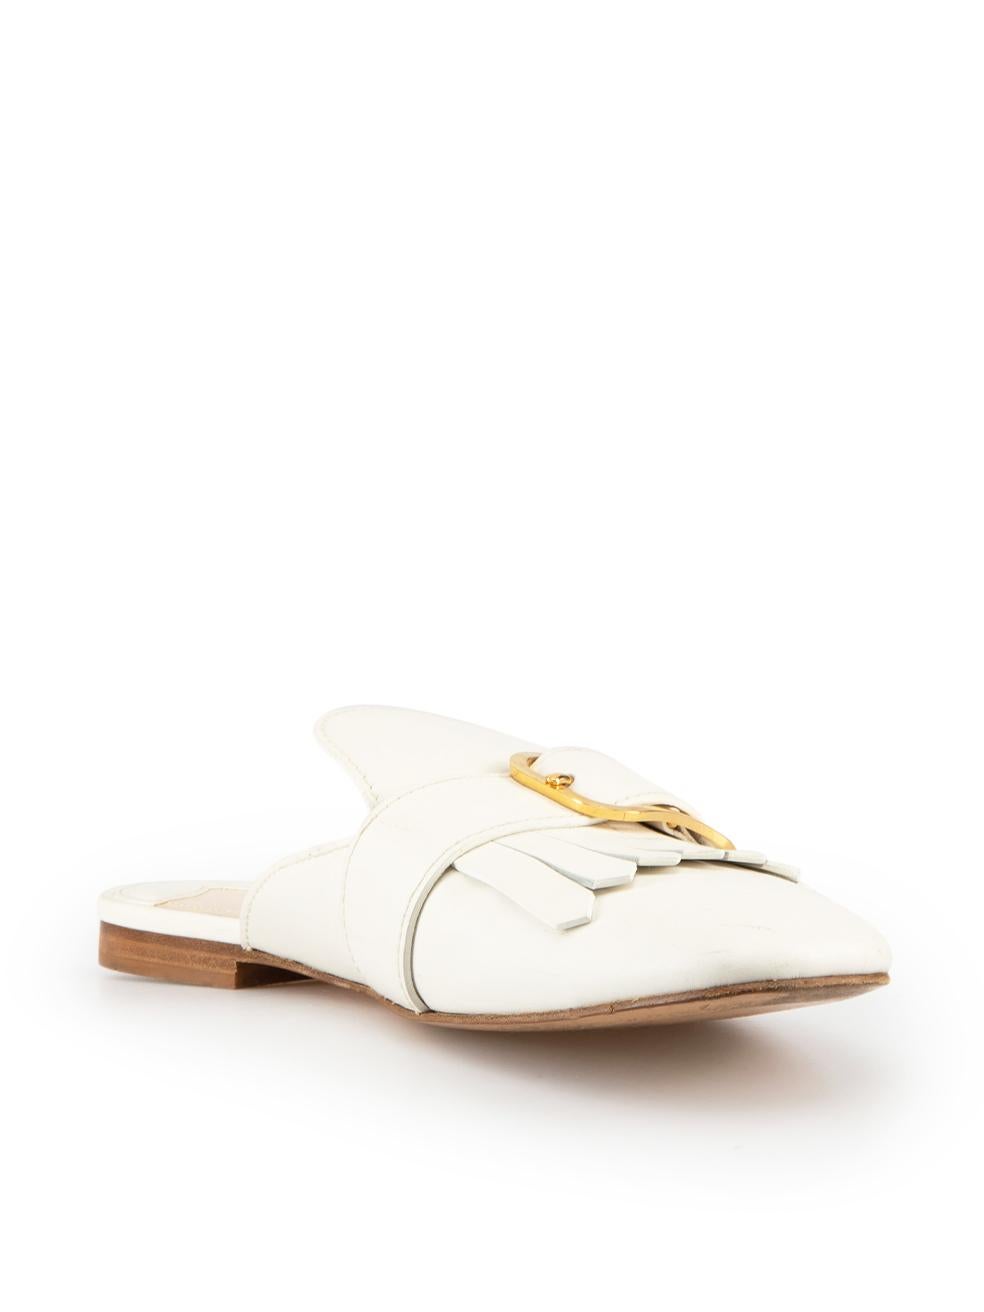 CONDITION is Good. Minor wear to mules is evident. Light indents and scuff marks to front of toes and minor creasing to leather on this used Prada designer resale item.

Details
Kiltie
White
Leather
Mules
Gold tone buckle detail
Square toe
Fringe